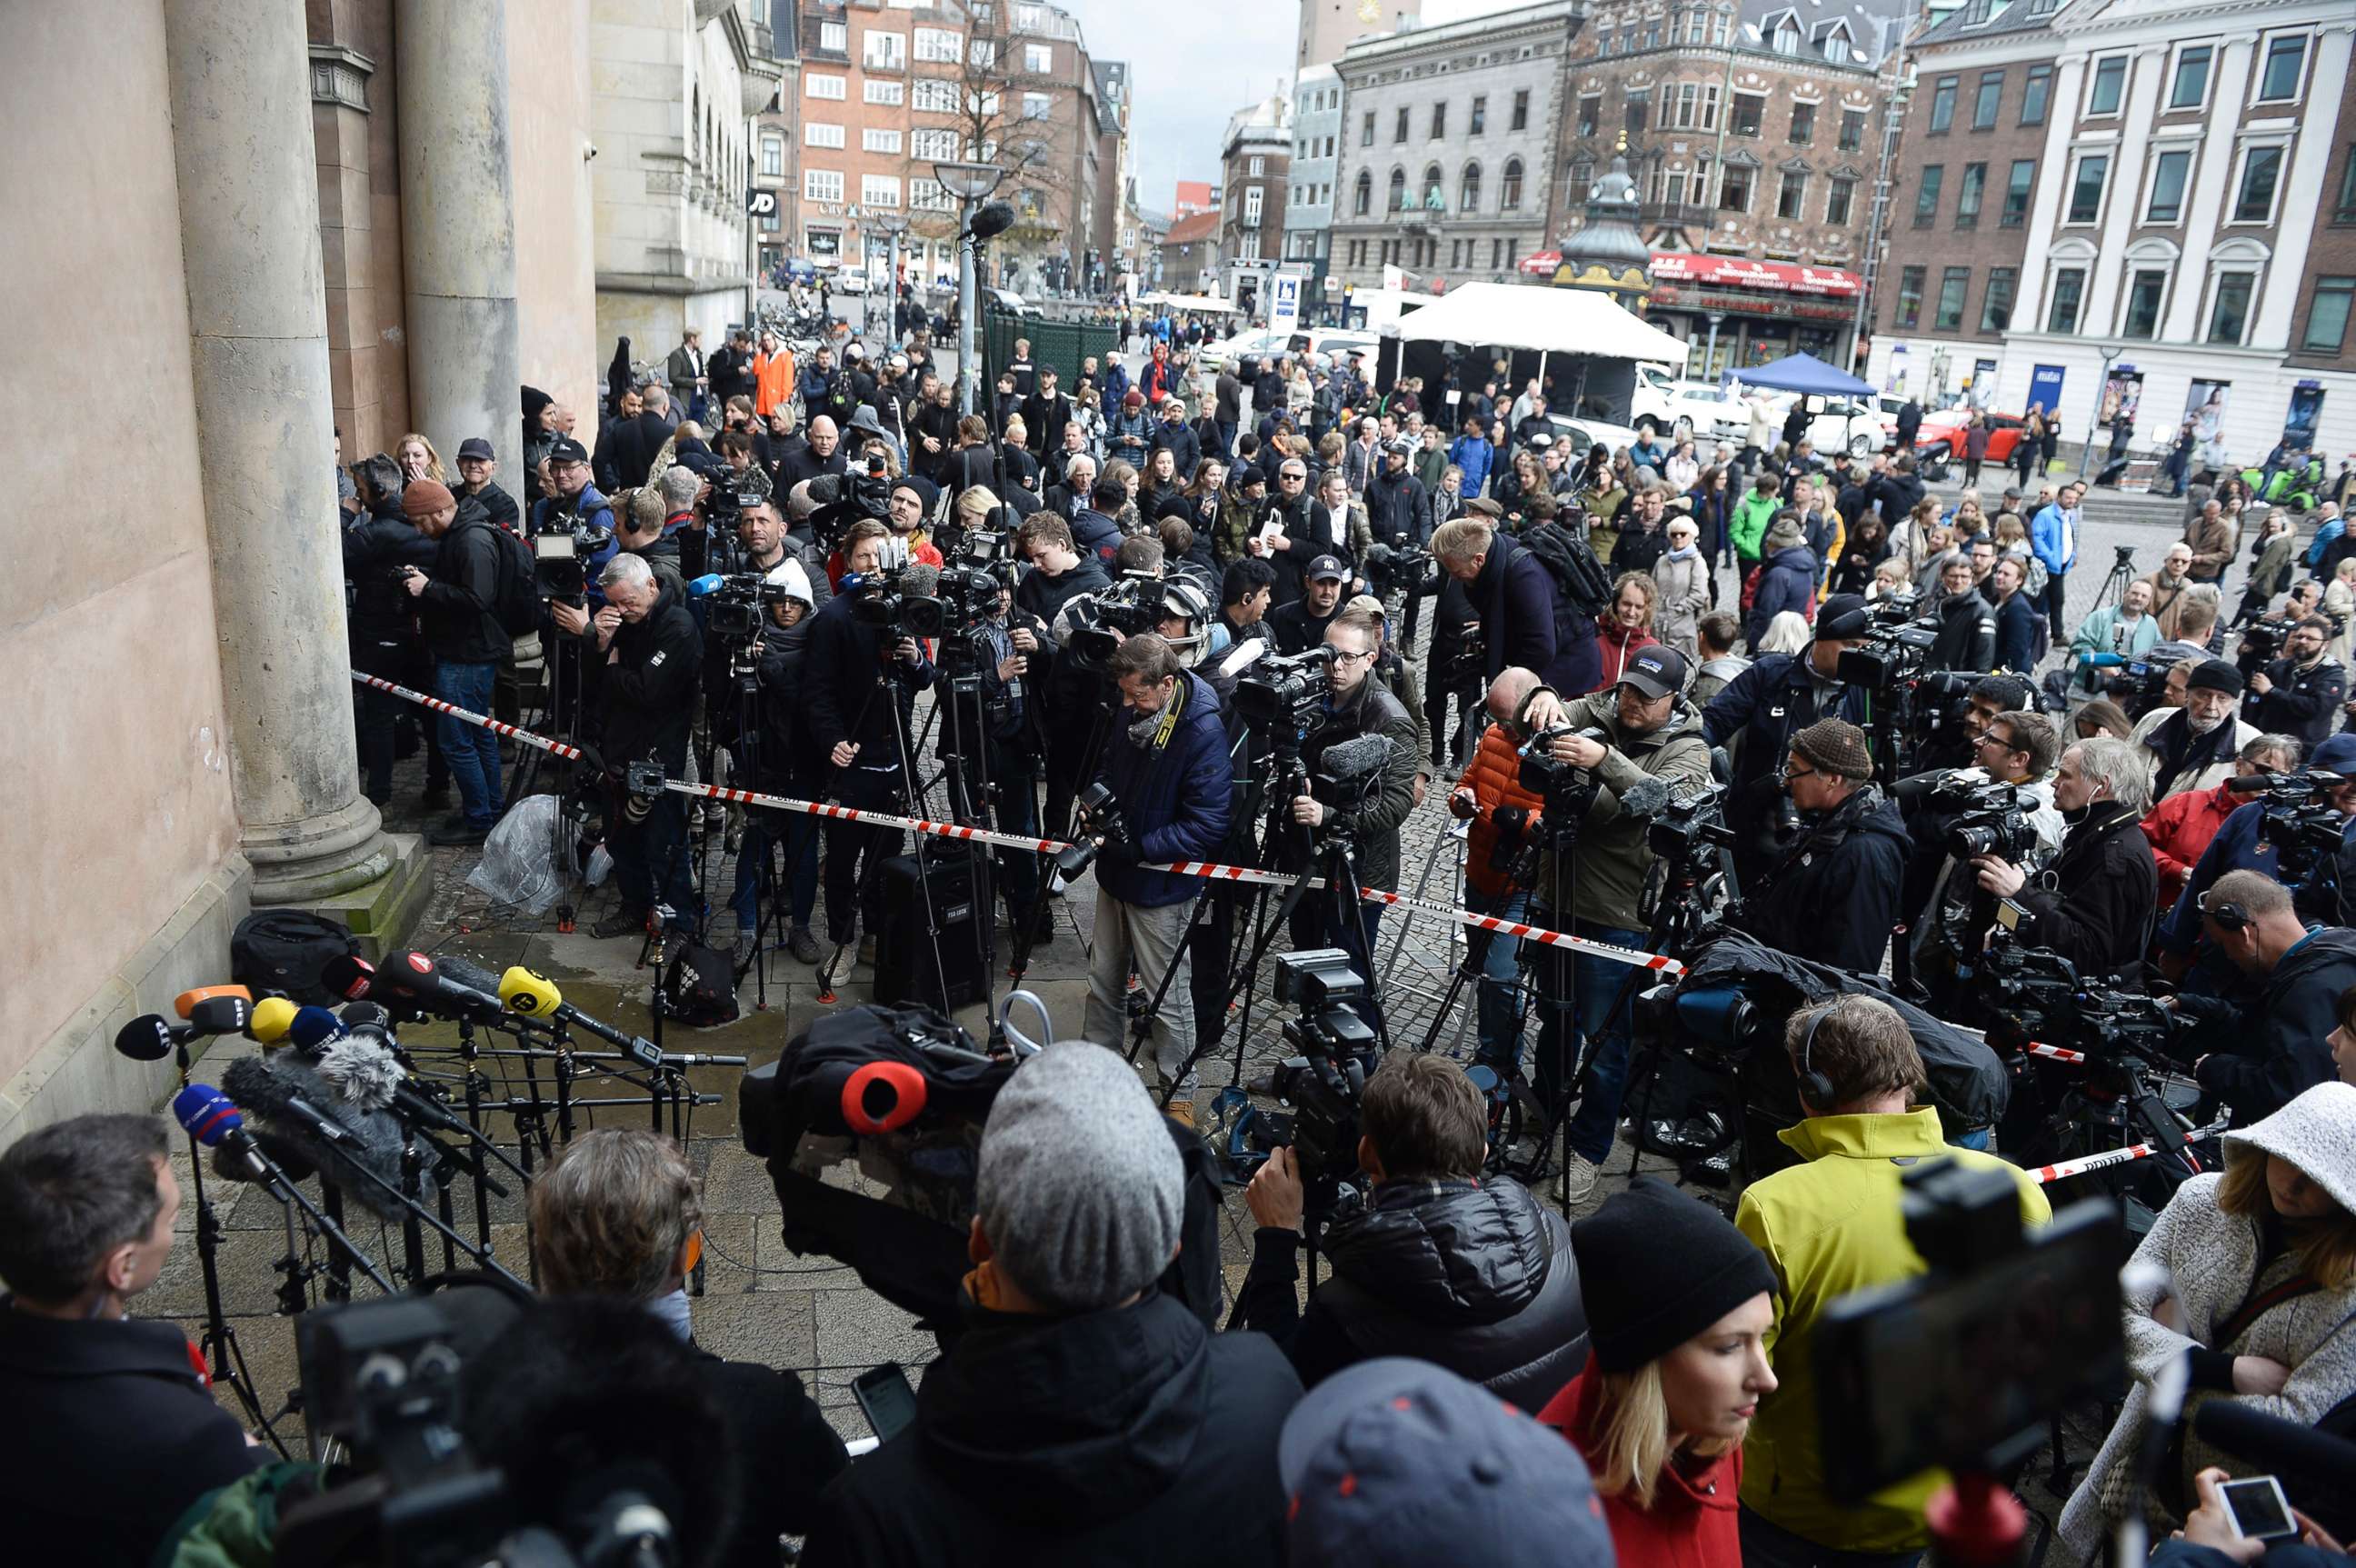 PHOTO: Press gather outside of the courthouse for the verdict in the case of Peter Madsen,  in Copenhagen, April 25, 2018.